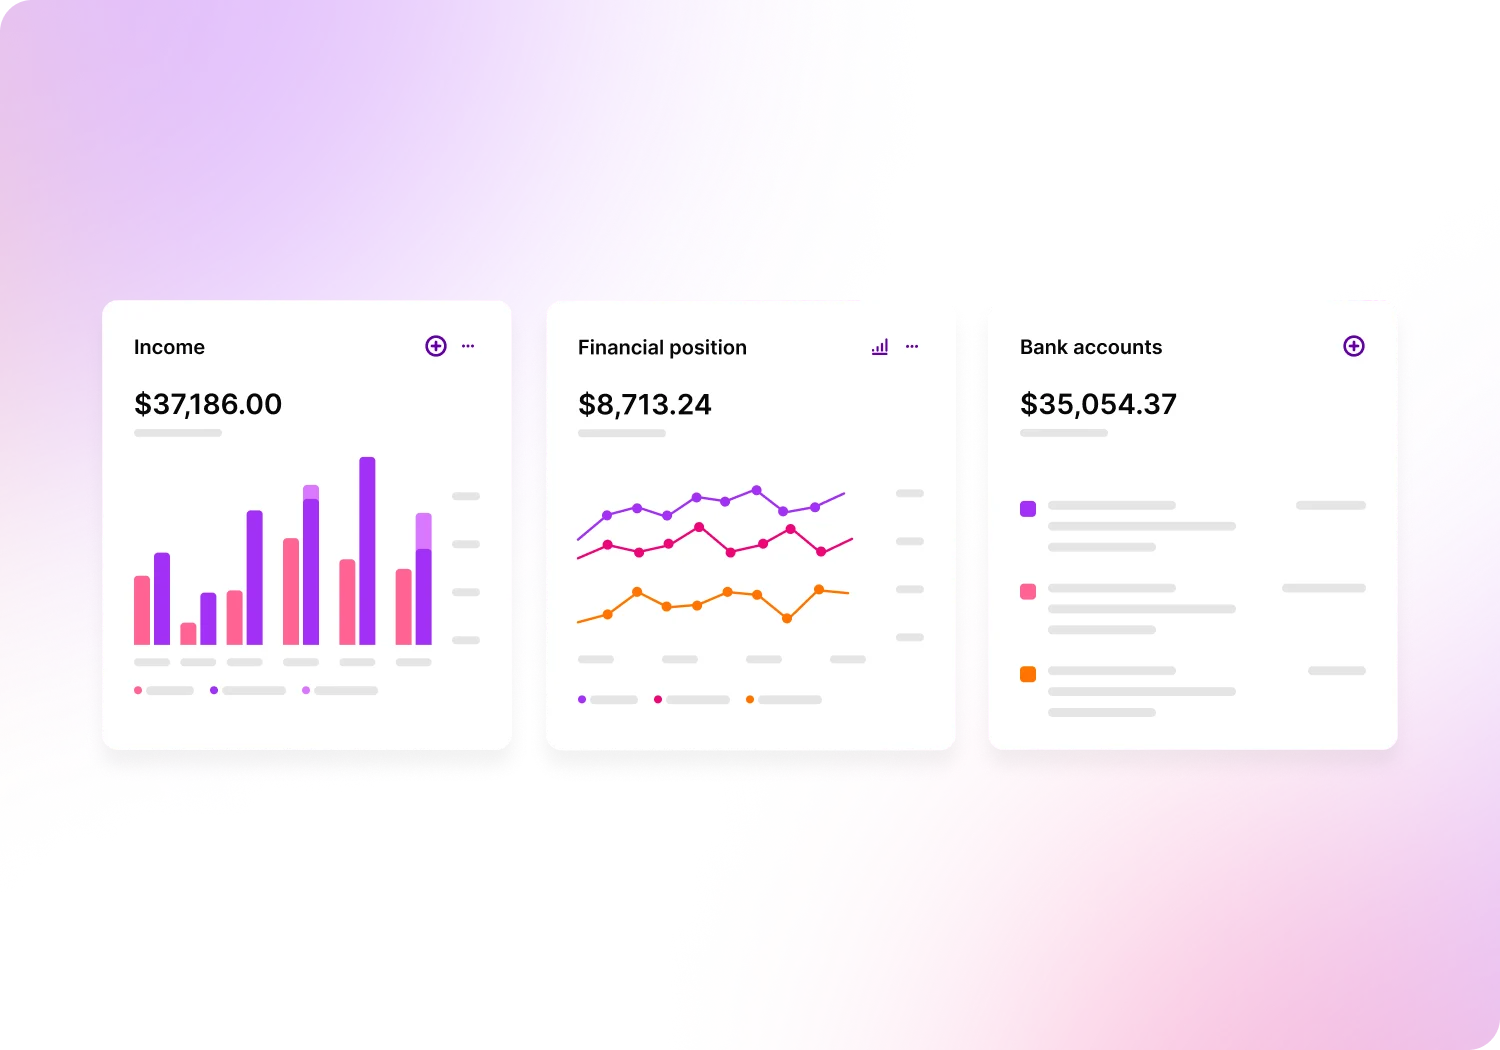 With reports you can see income and expense reports, monitor your financial position over time and connect bank accounts. 